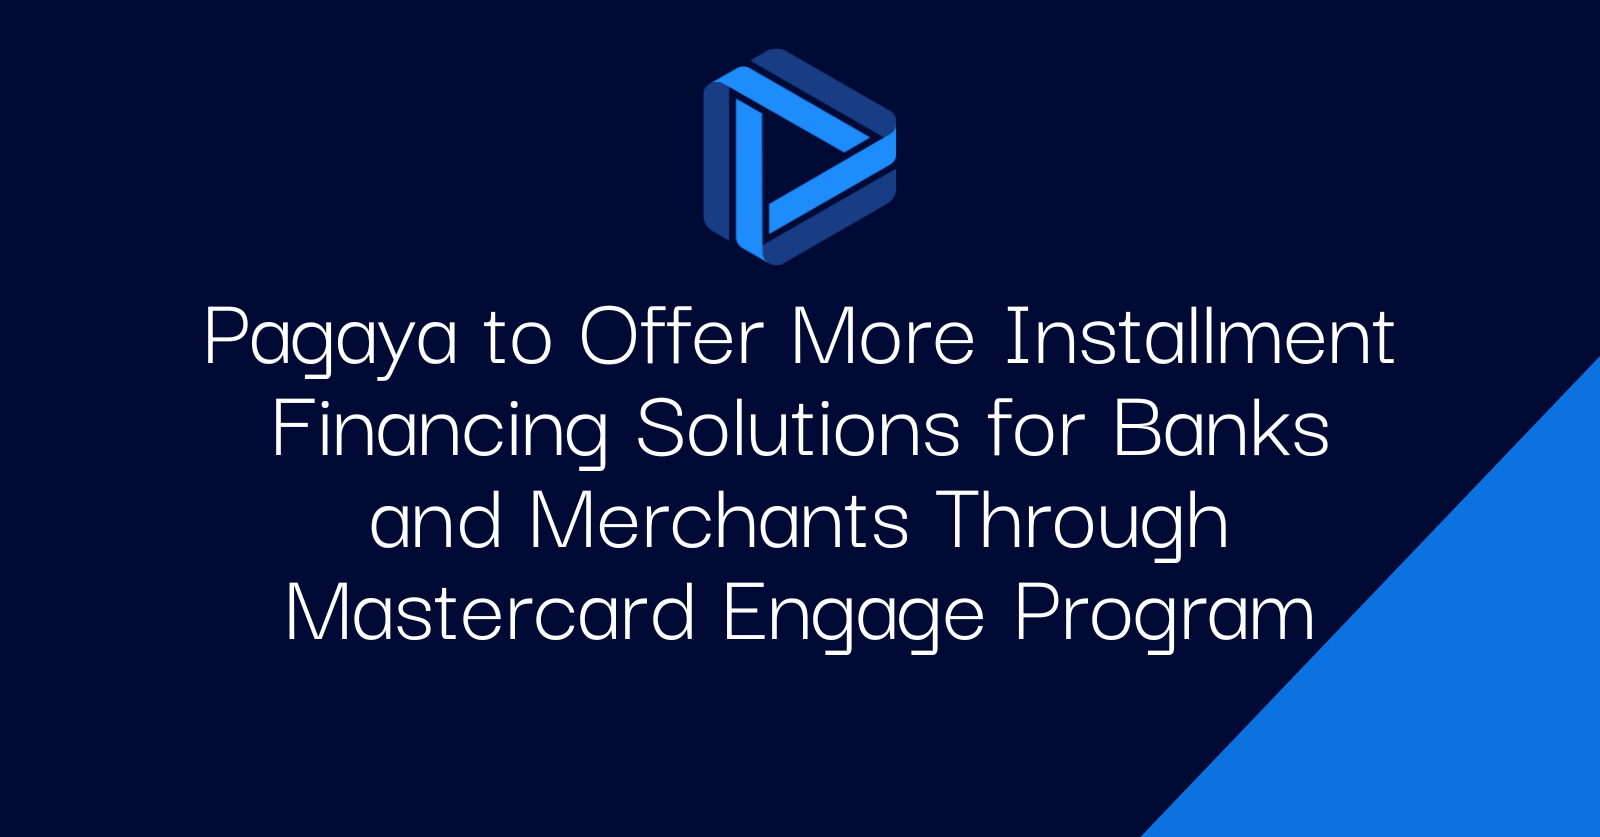 Pagaya to Offer More Installment Financing Solutions for Banks and Merchants Through Mastercard Engage Program